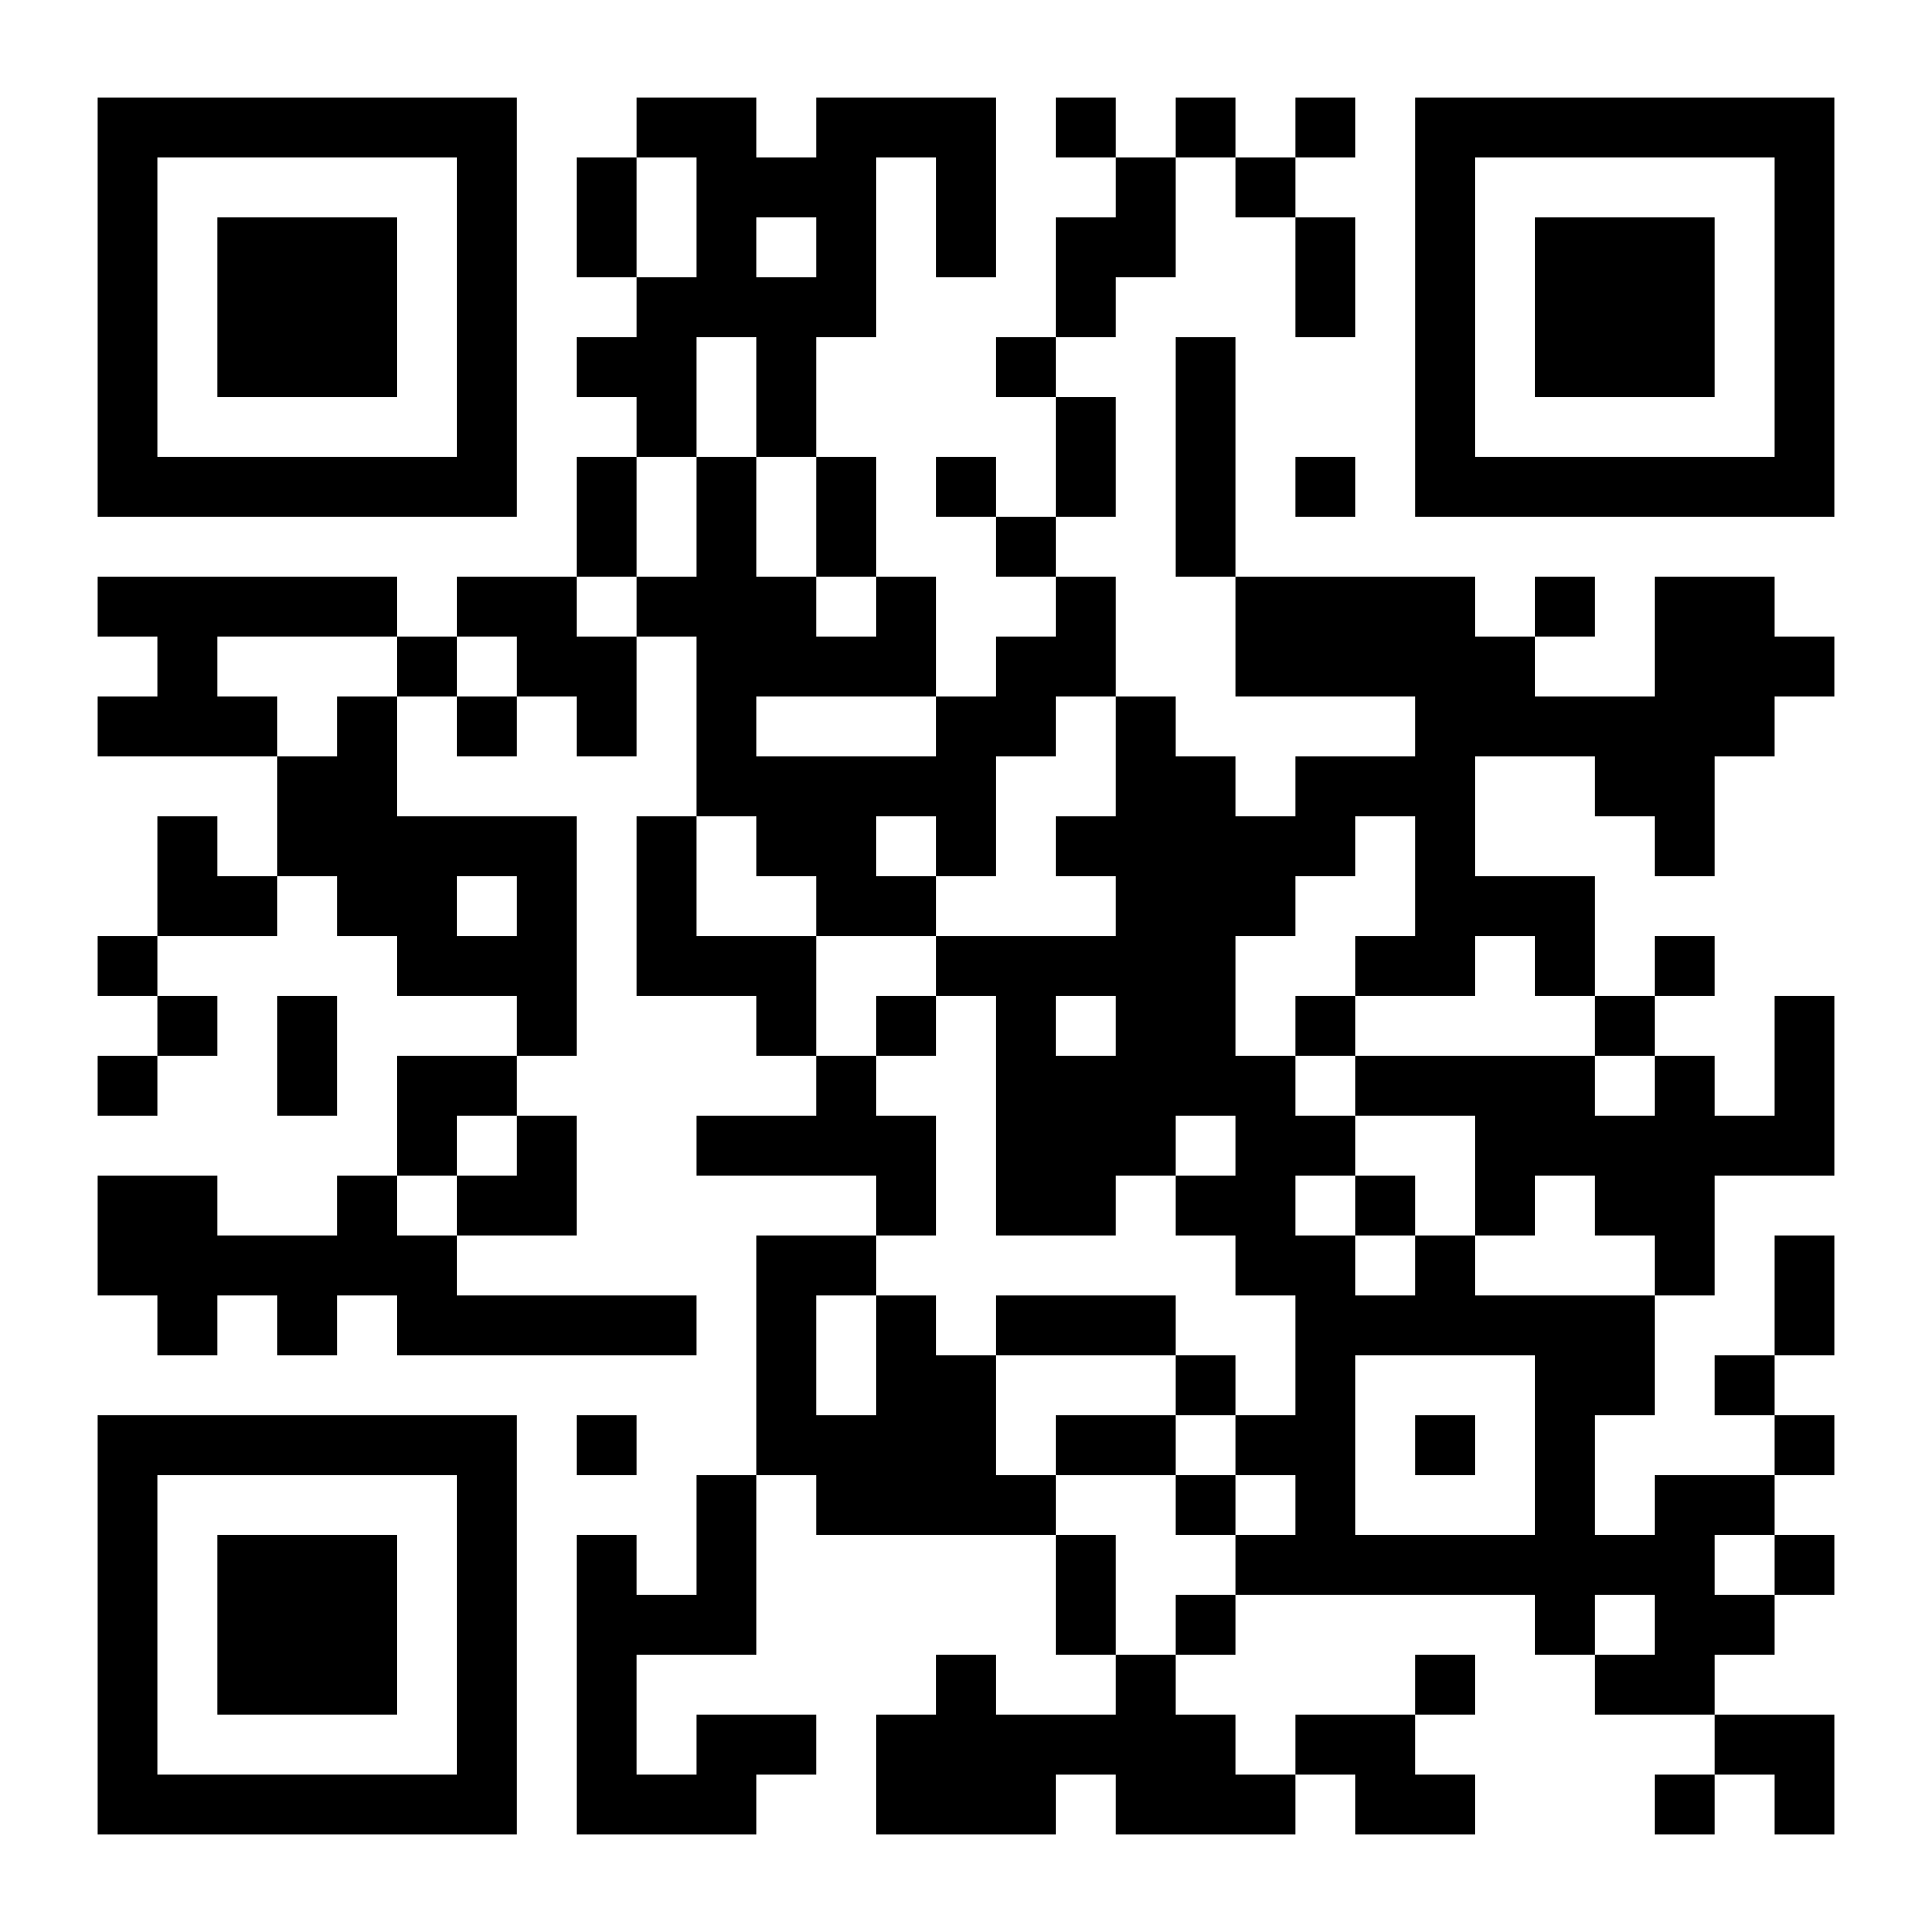 Scan this QR code with your mobile device